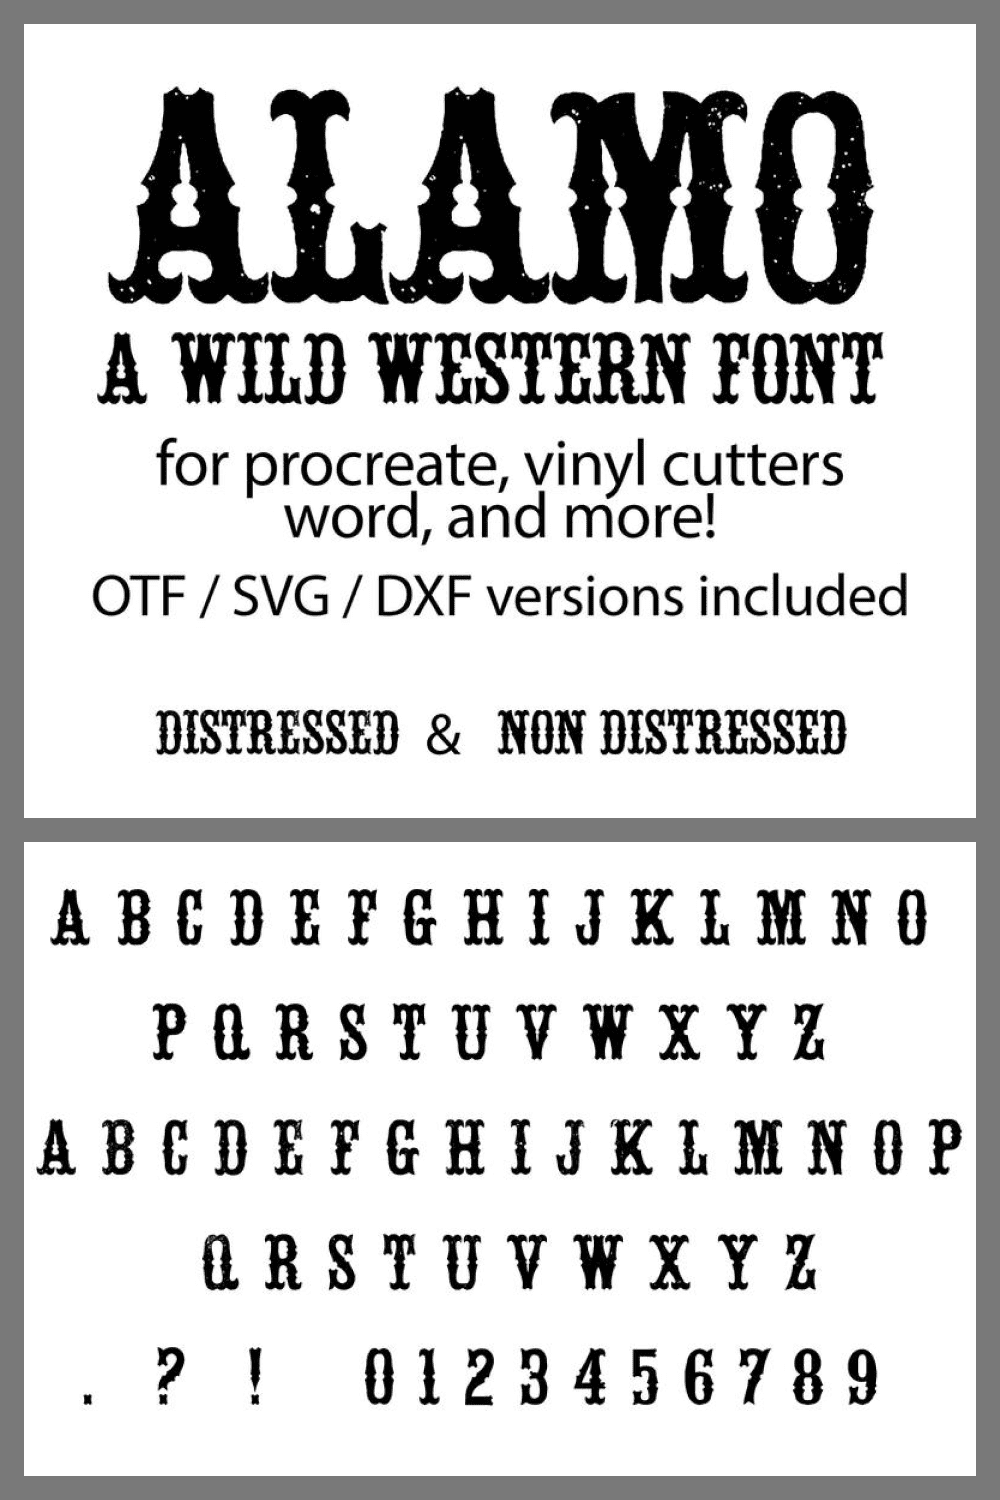 A good font for writing adventurous phrases.